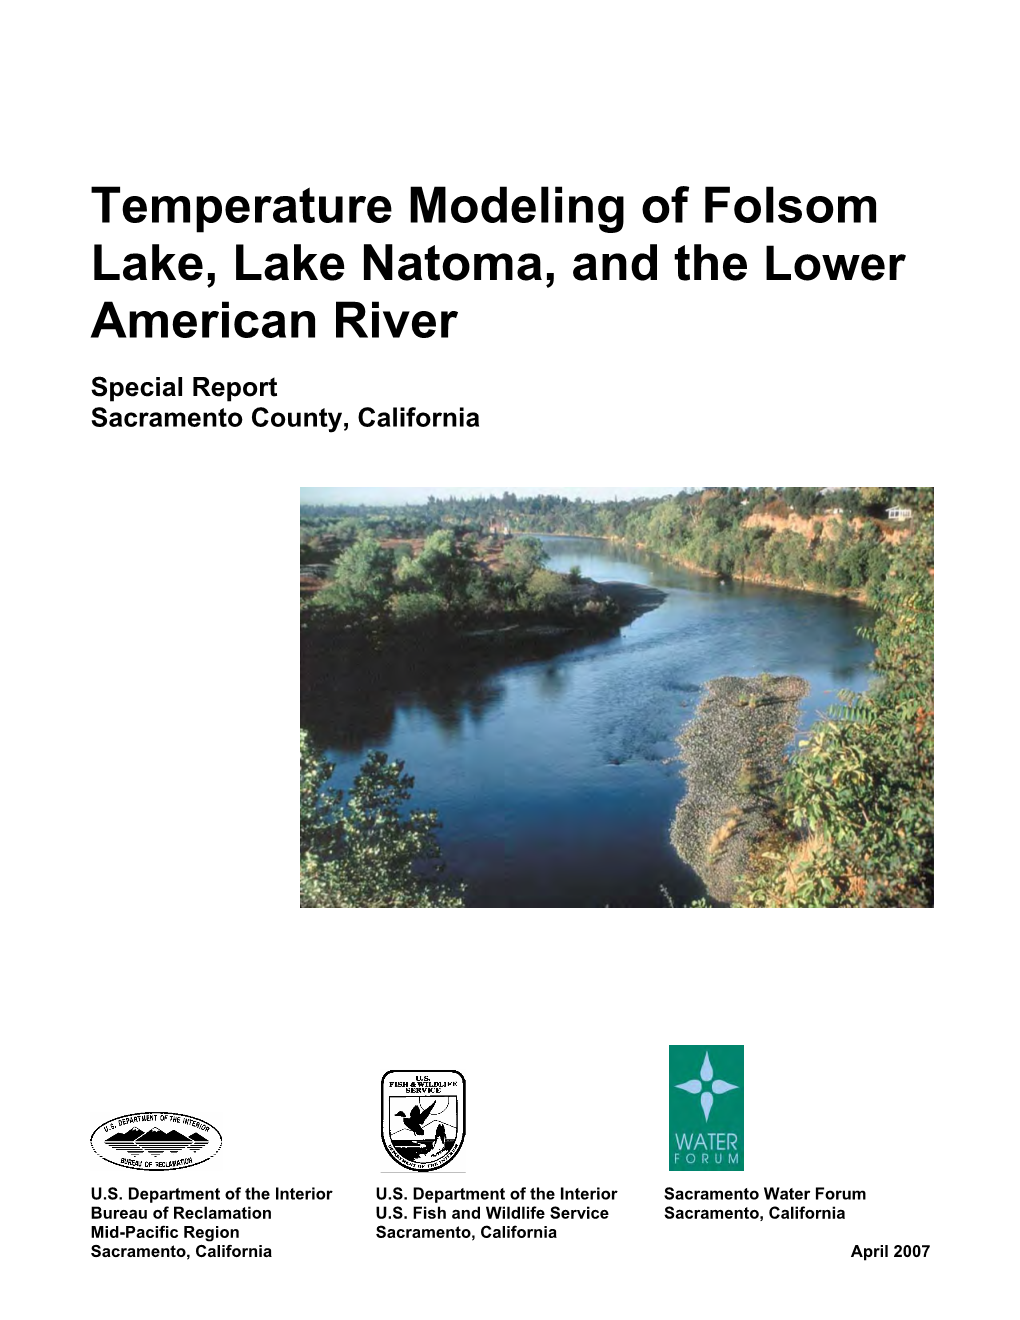 Temperature Modeling of Folsom Lake, Lake Natoma, and the Lower American River